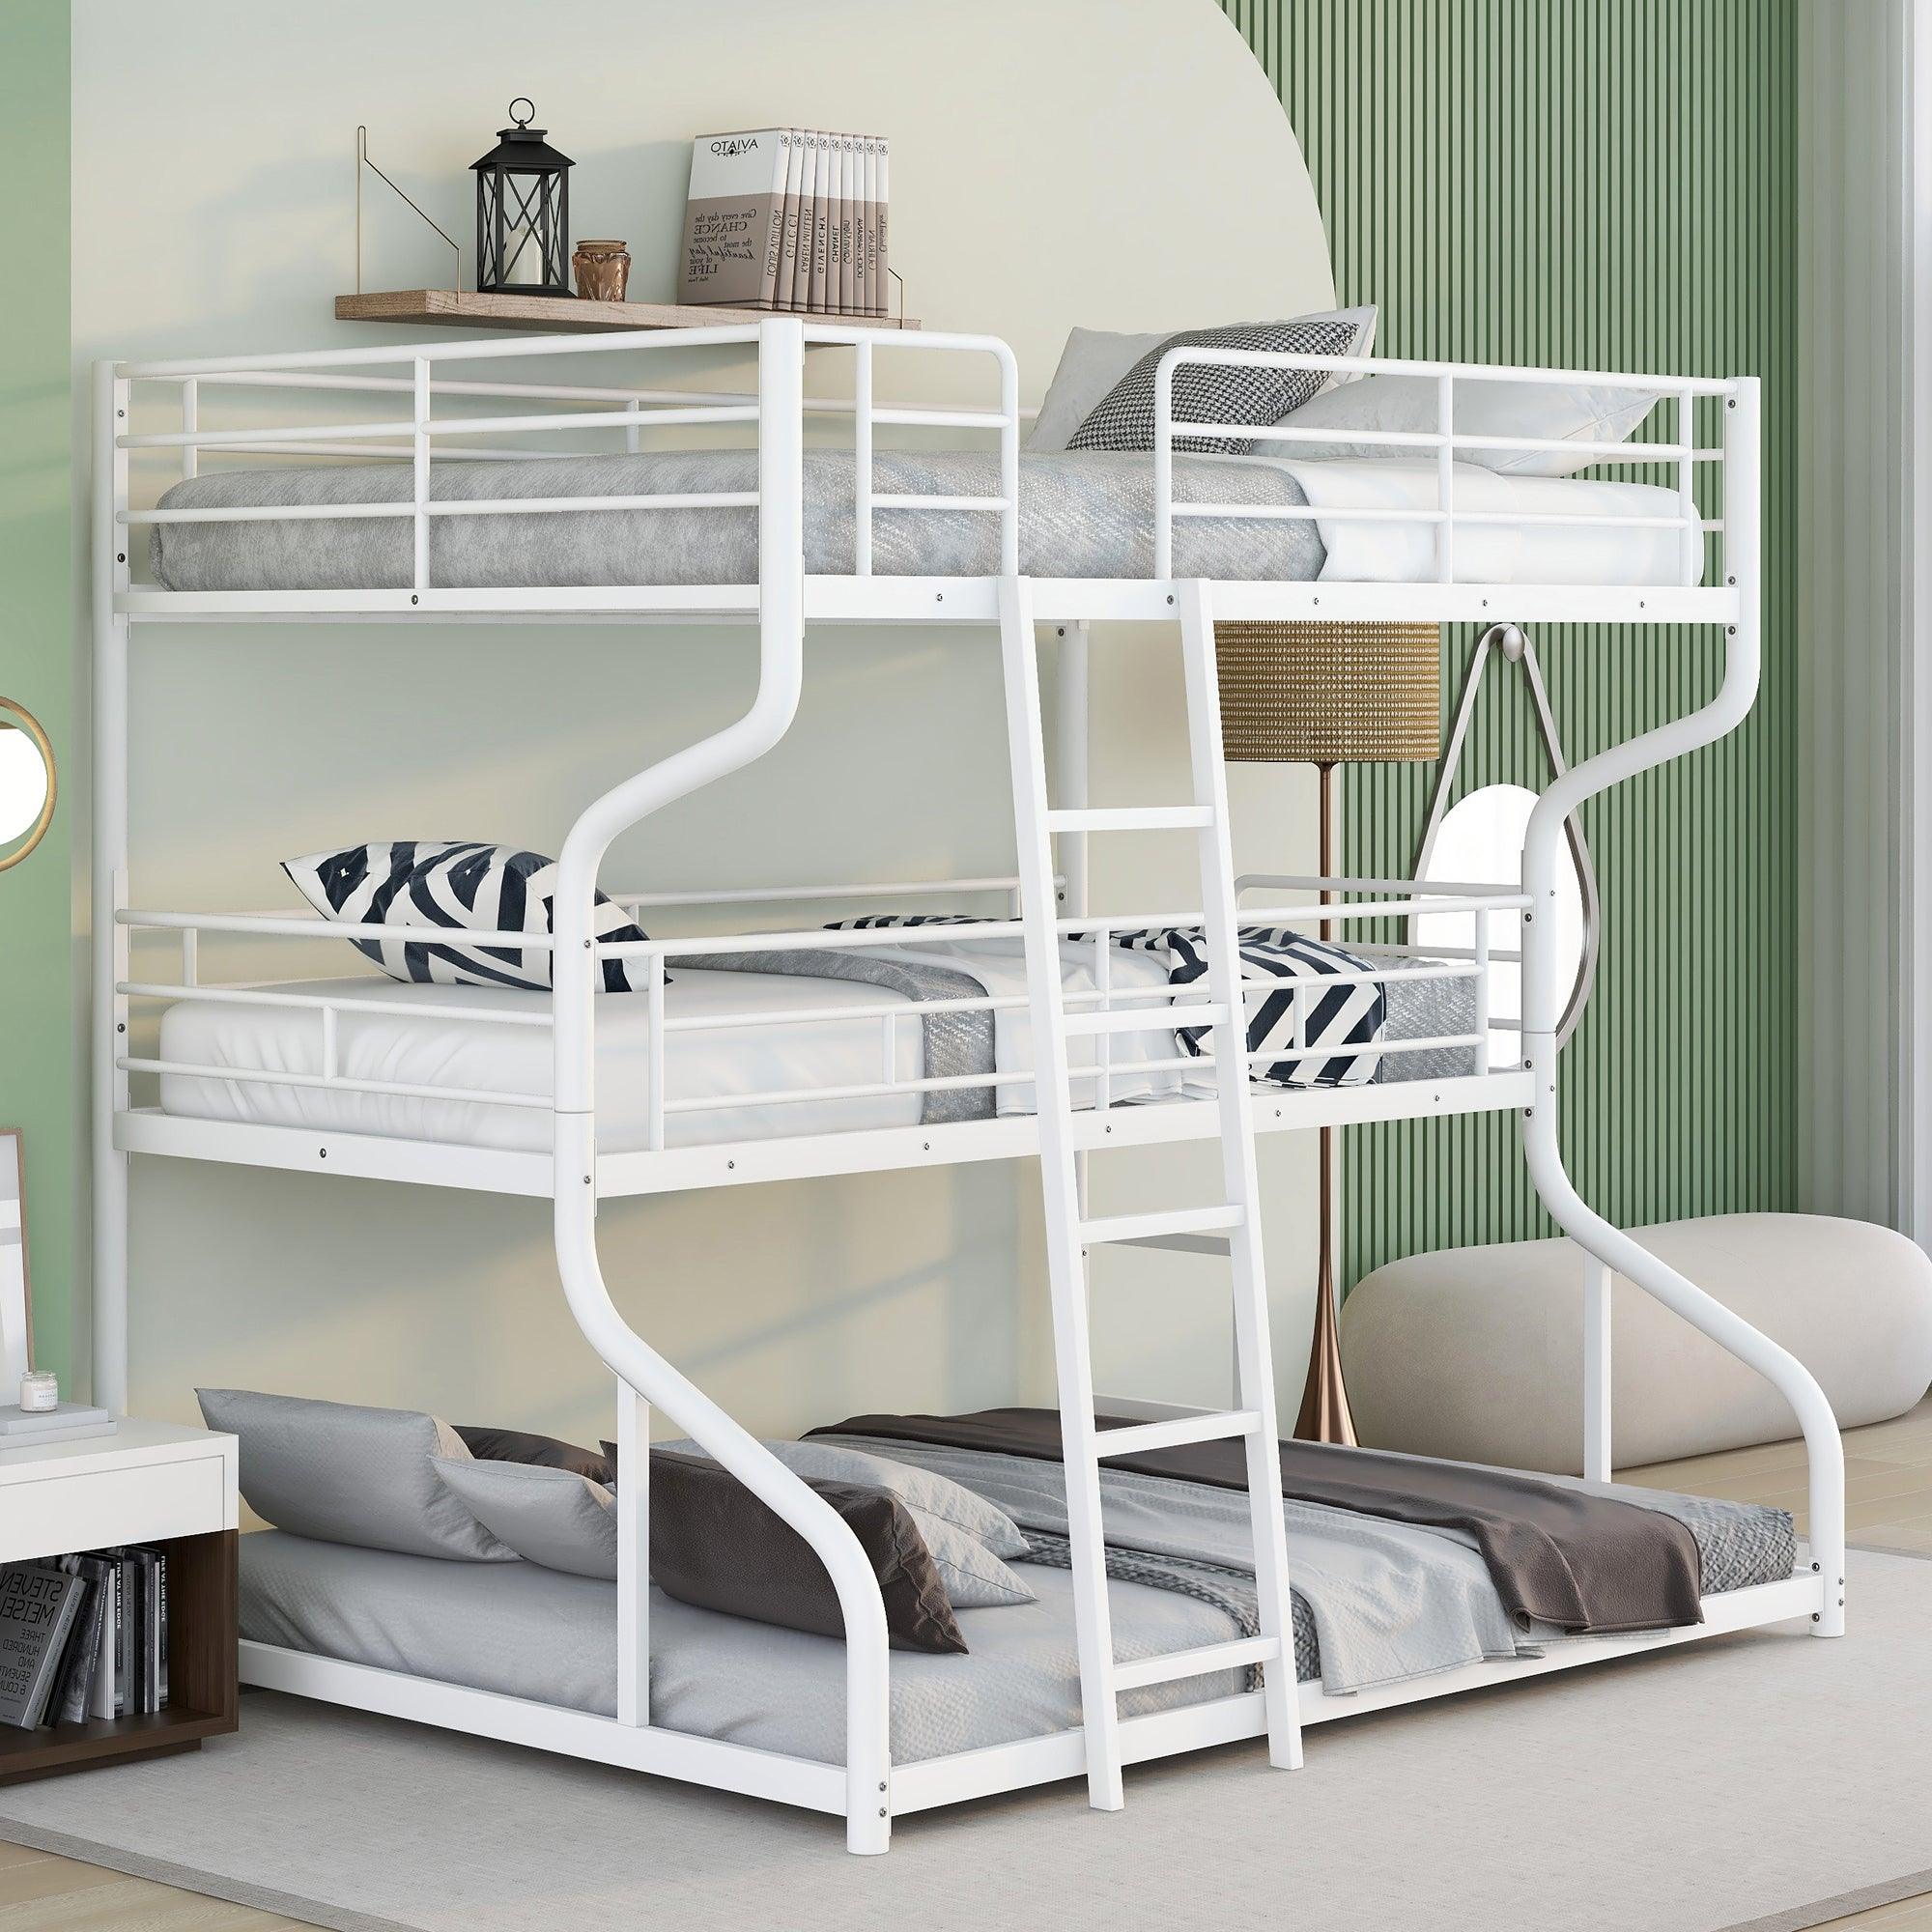 ???? Full Xl Over Twin Xl Over Queen Size Triple Bunk Bed With Long and Short Ladder, White